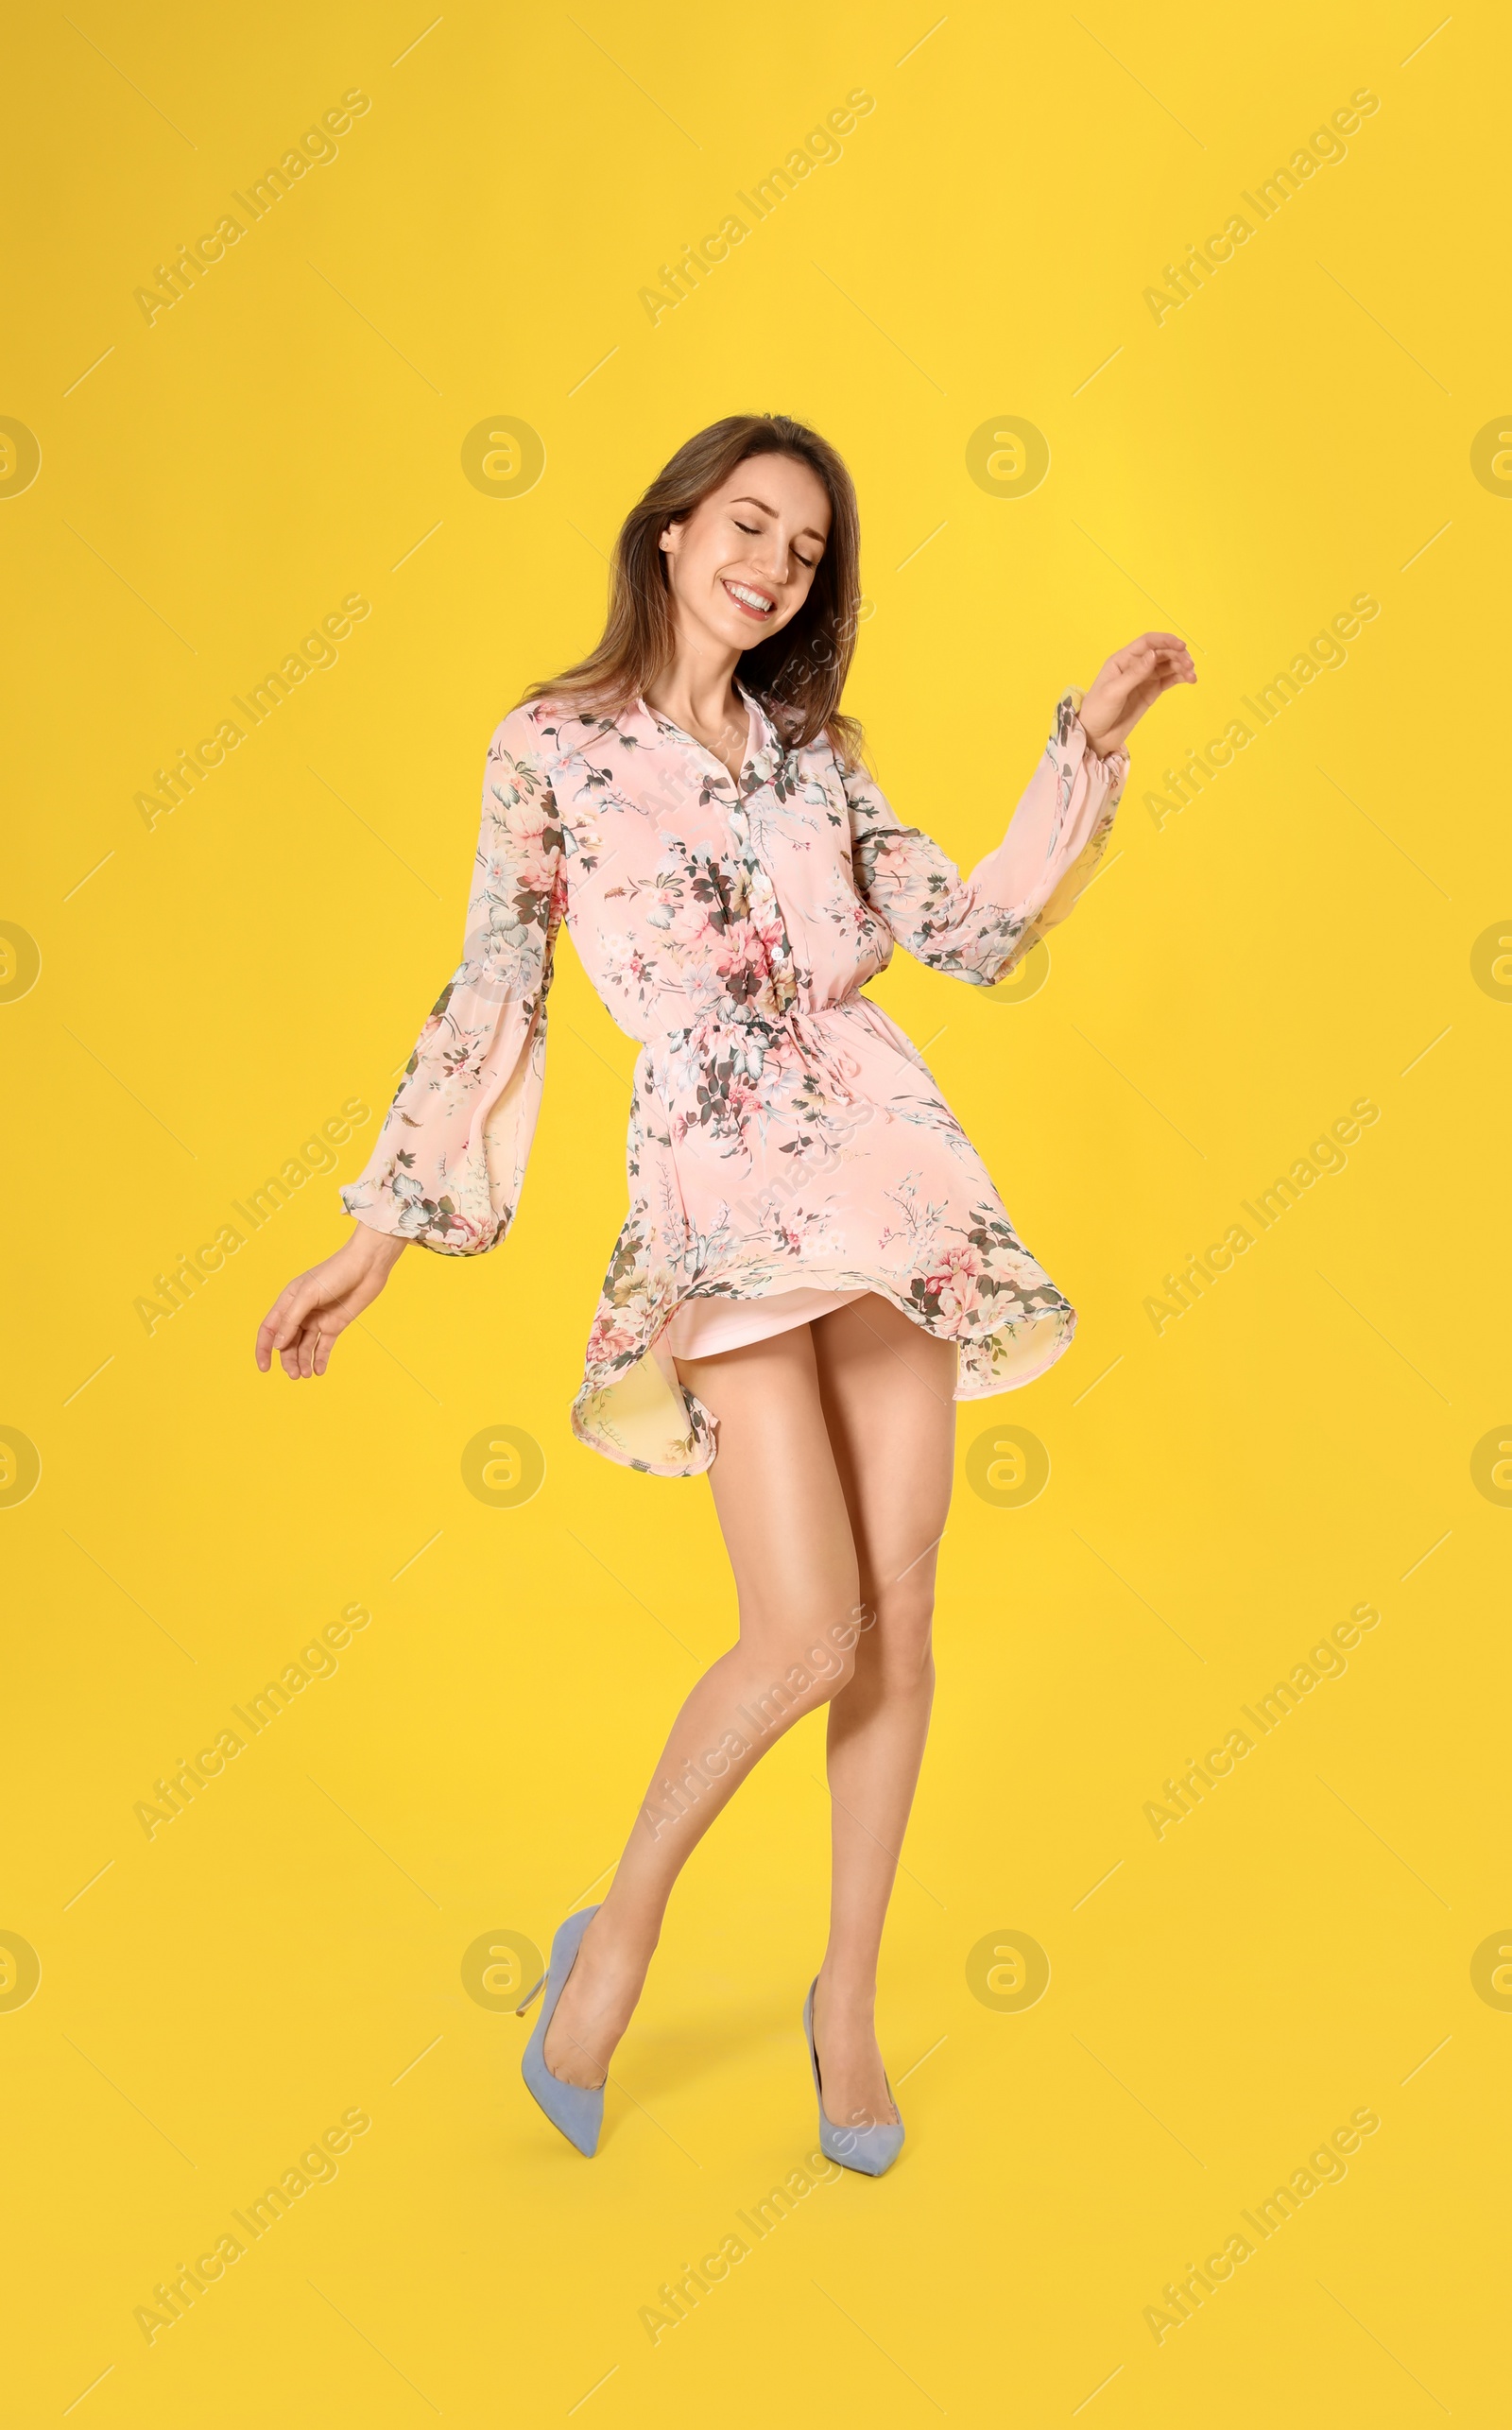 Photo of Young woman wearing floral print dress and elegant shoes on yellow background